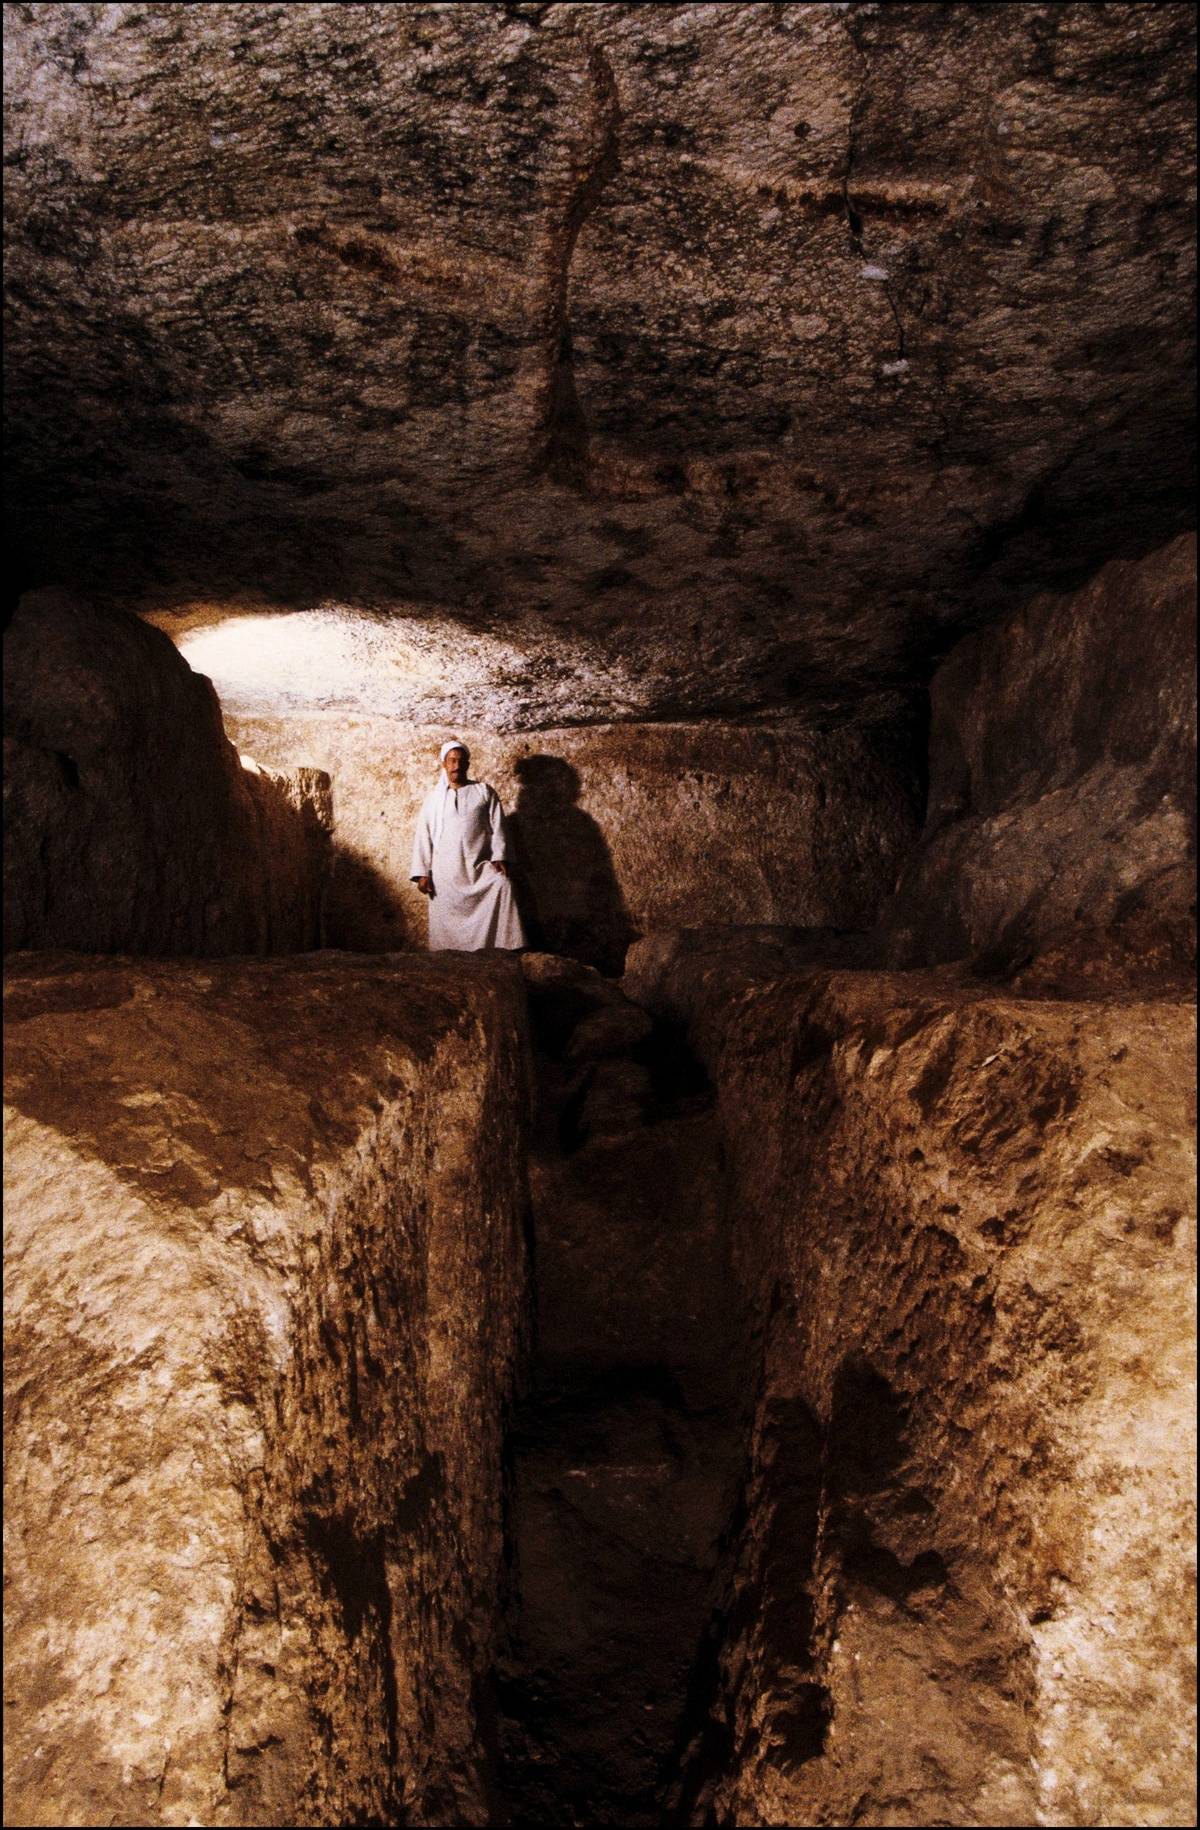 <p>The Pyramids are equipped with an intricate tunnel system that's carved from limestone bedrock. It's in these tunnels that the most unbelievable discoveries are made. Man still hasn't scaled every corner of the twisting labyrinths – and even so, when a discovery is made, scientists are often bewildered.</p> <p>Theorists believe mainstream scholars and scientists are hiding an underworld of lost catacombs beneath the pyramids. We have evidence of labyrinths beneath the Great Pyramid, but some people believe there's a whole lot more— about 55 miles south of Cairo underneath the city of Hawara. This is alluded to in various ancient texts and described by authors like Herodotus and Strabo.</p>